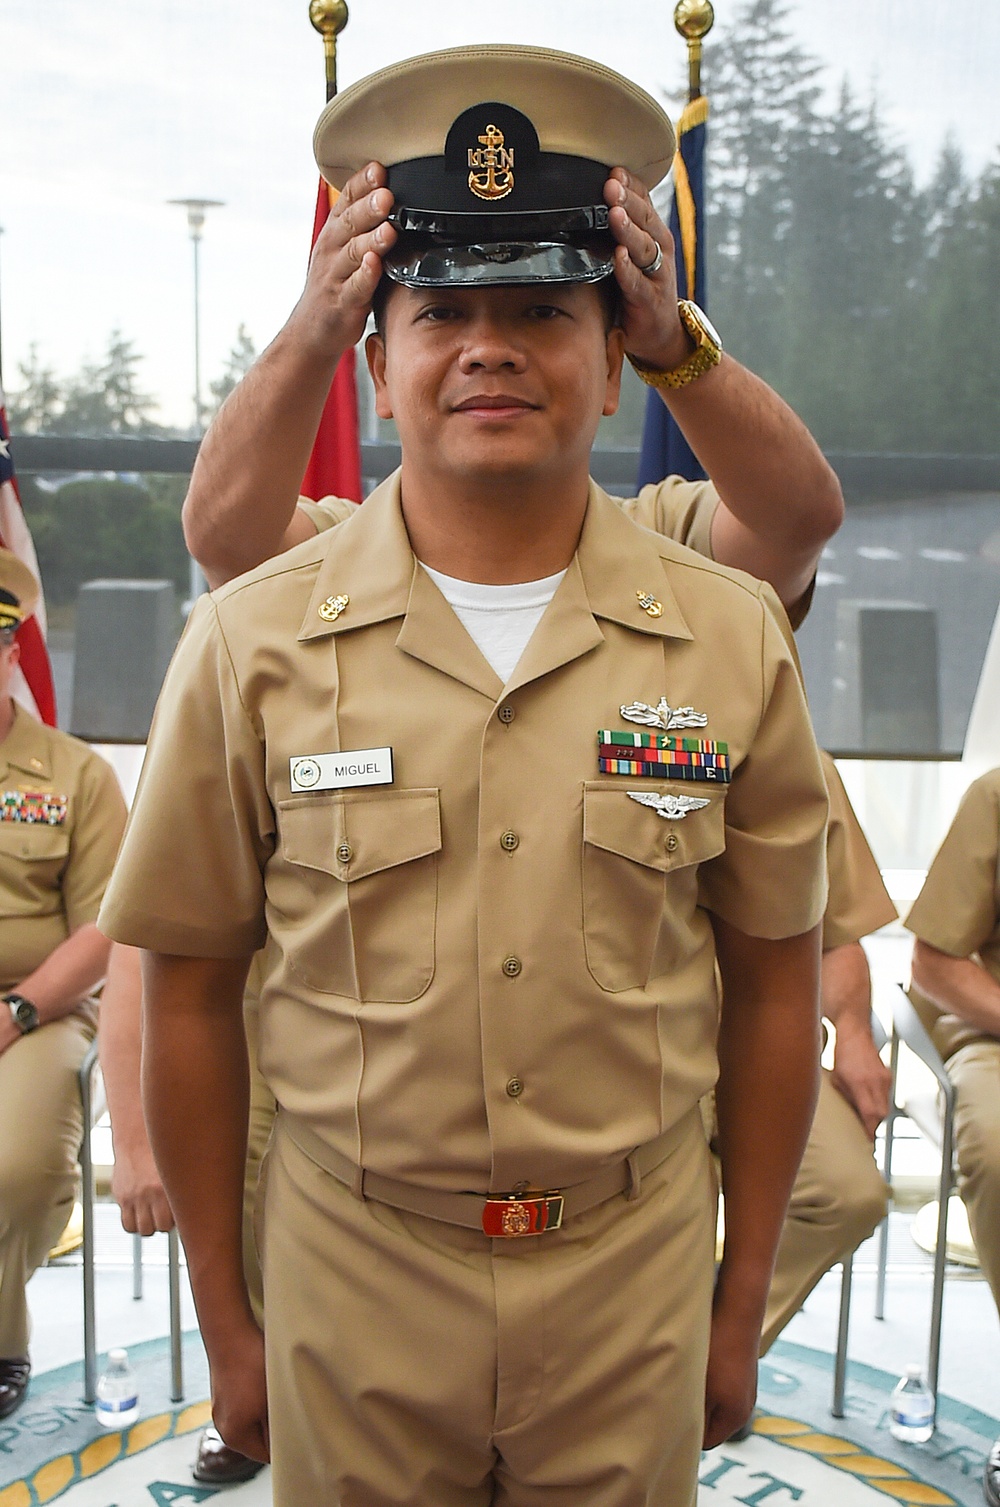 NHB welcomes newly tried, tested and selected Chief Petty Officers